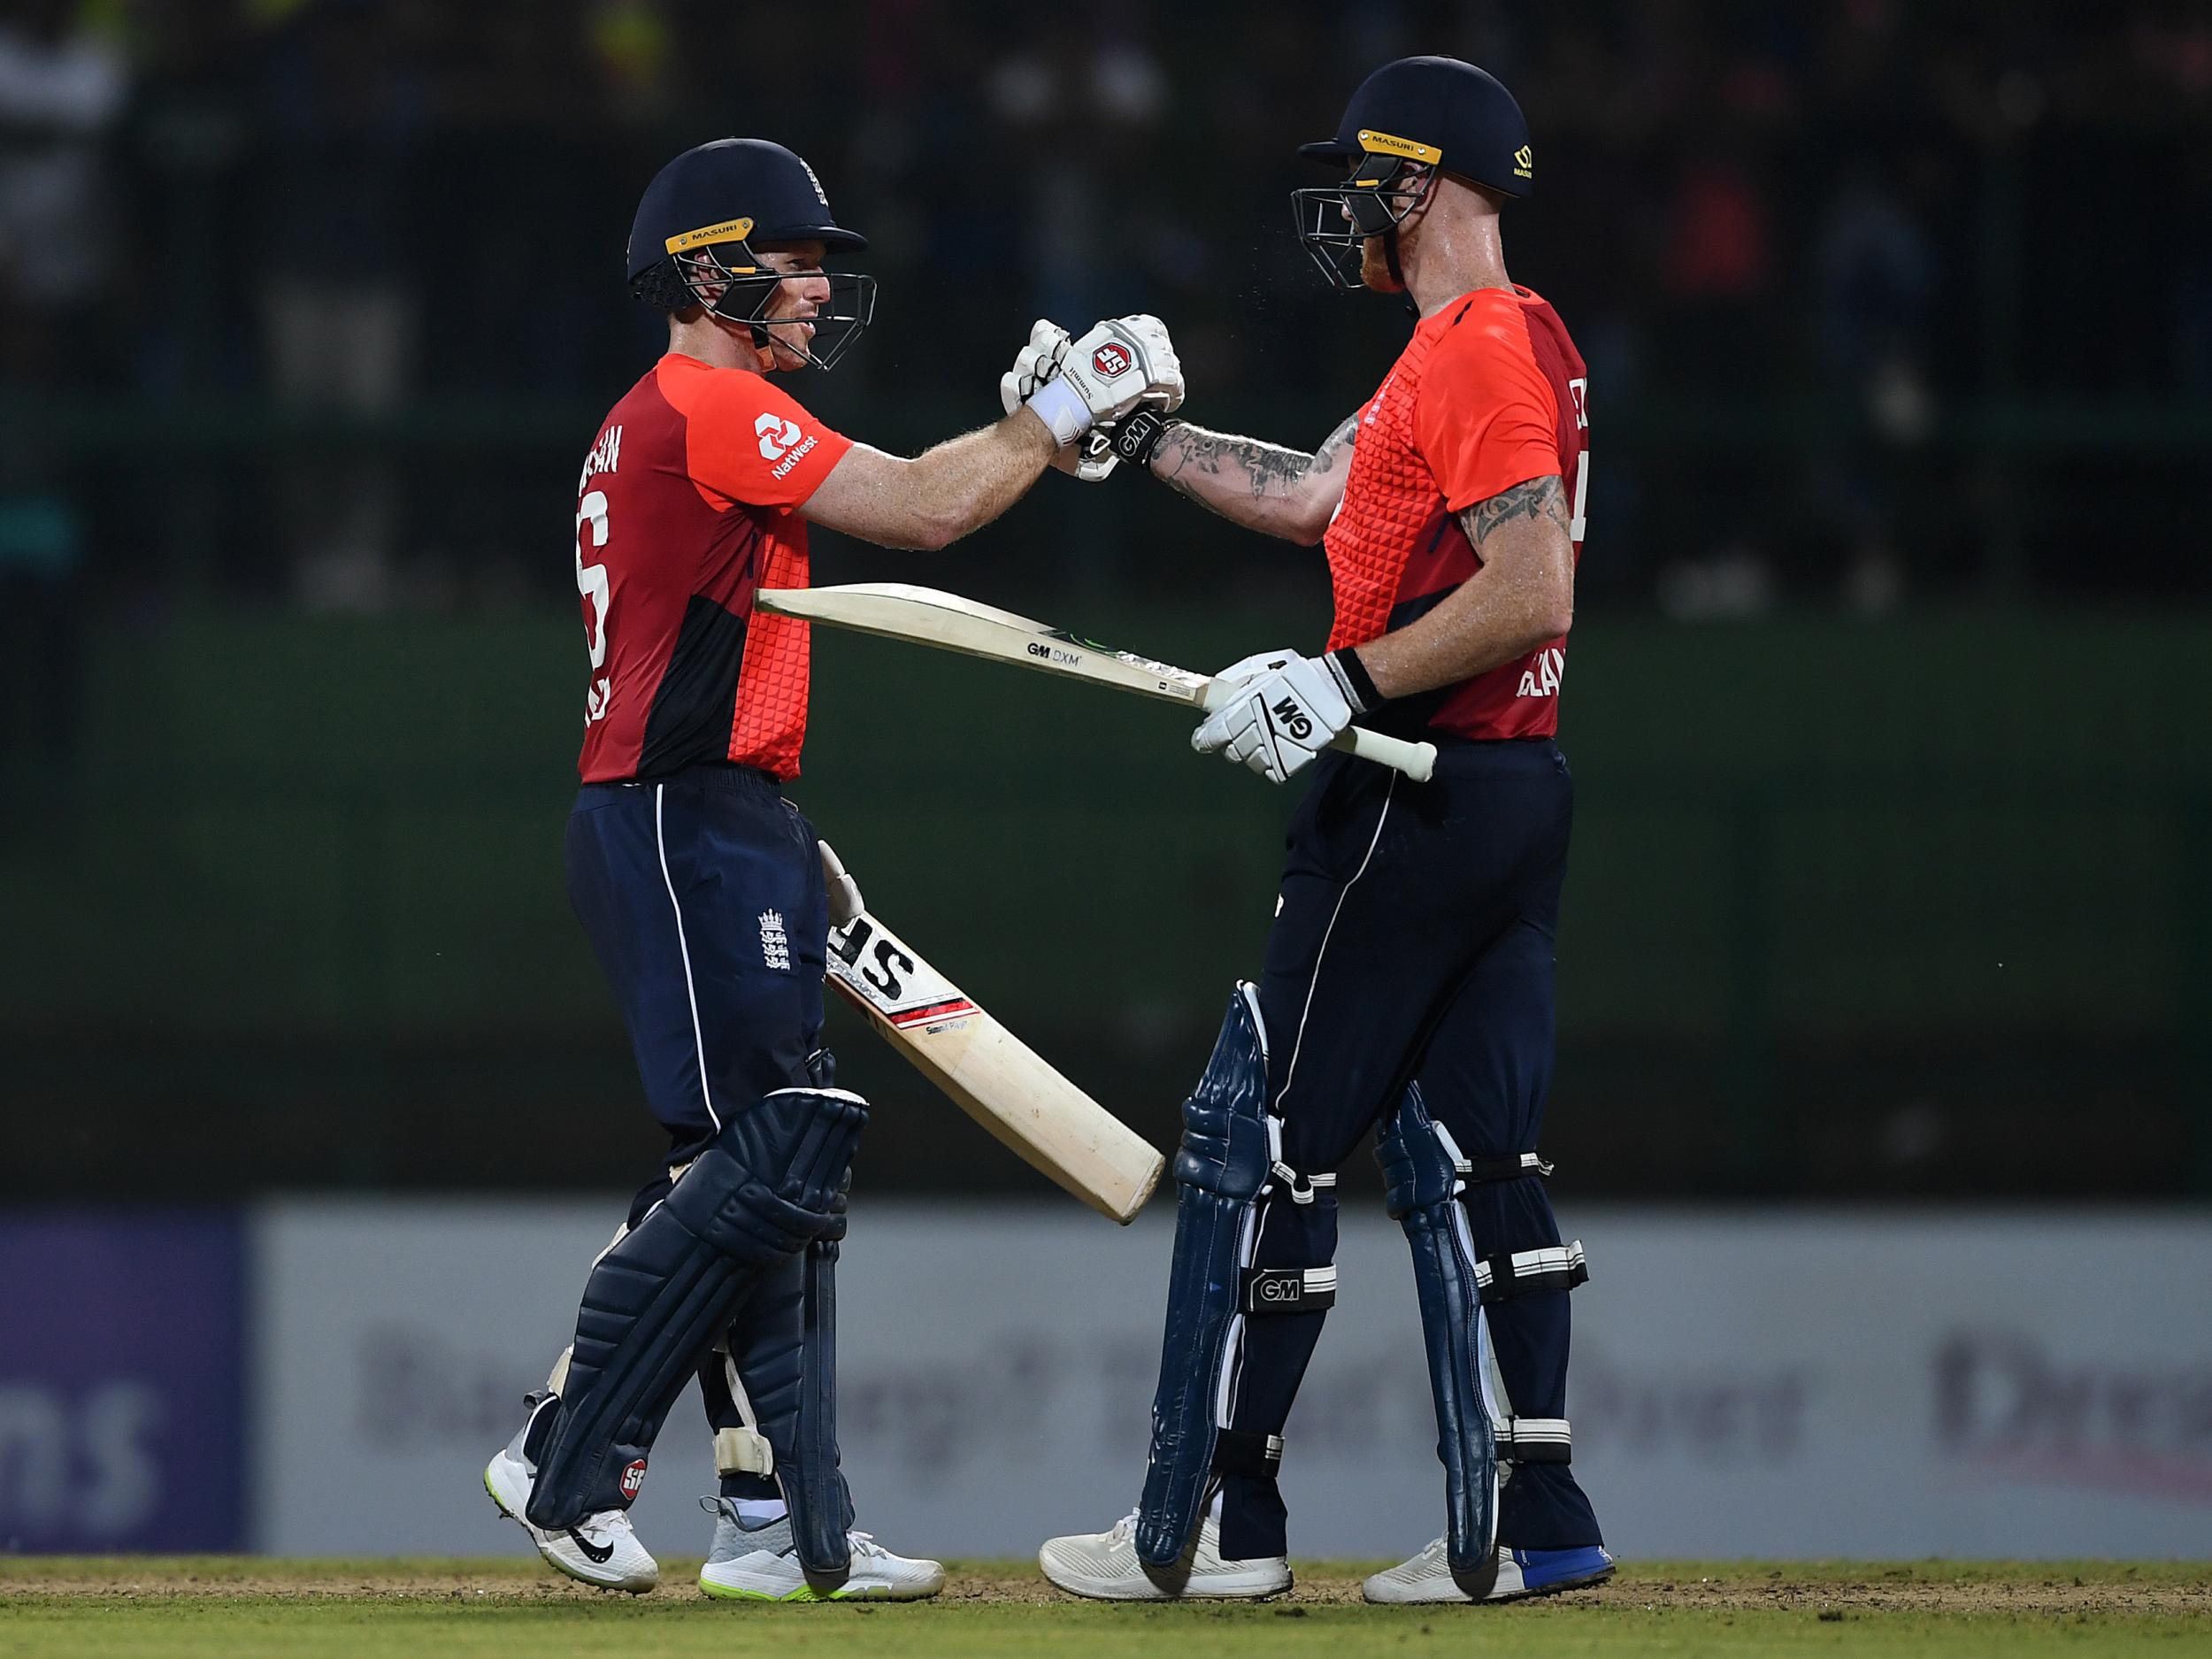 Eoin Morgan's unbeaten 58 sealed the win for England